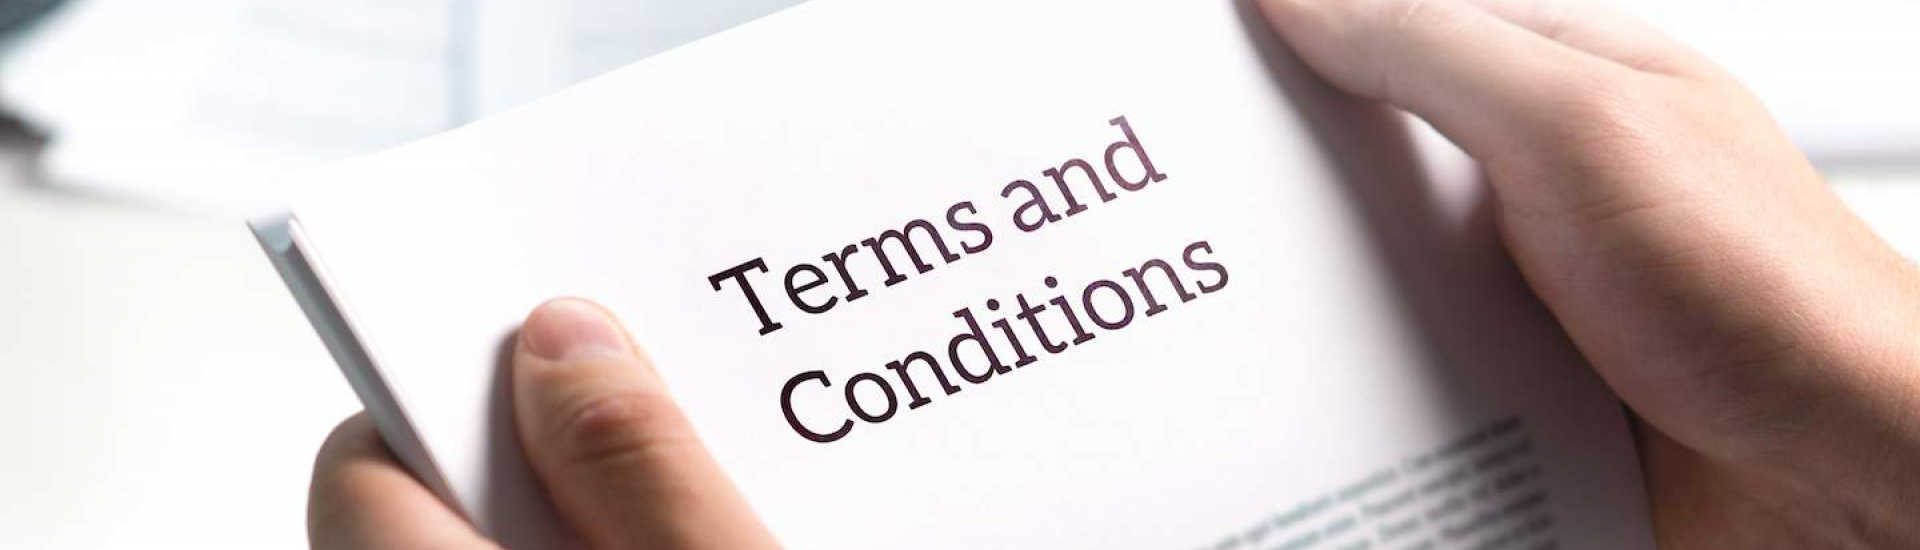 Standard terms and conditions